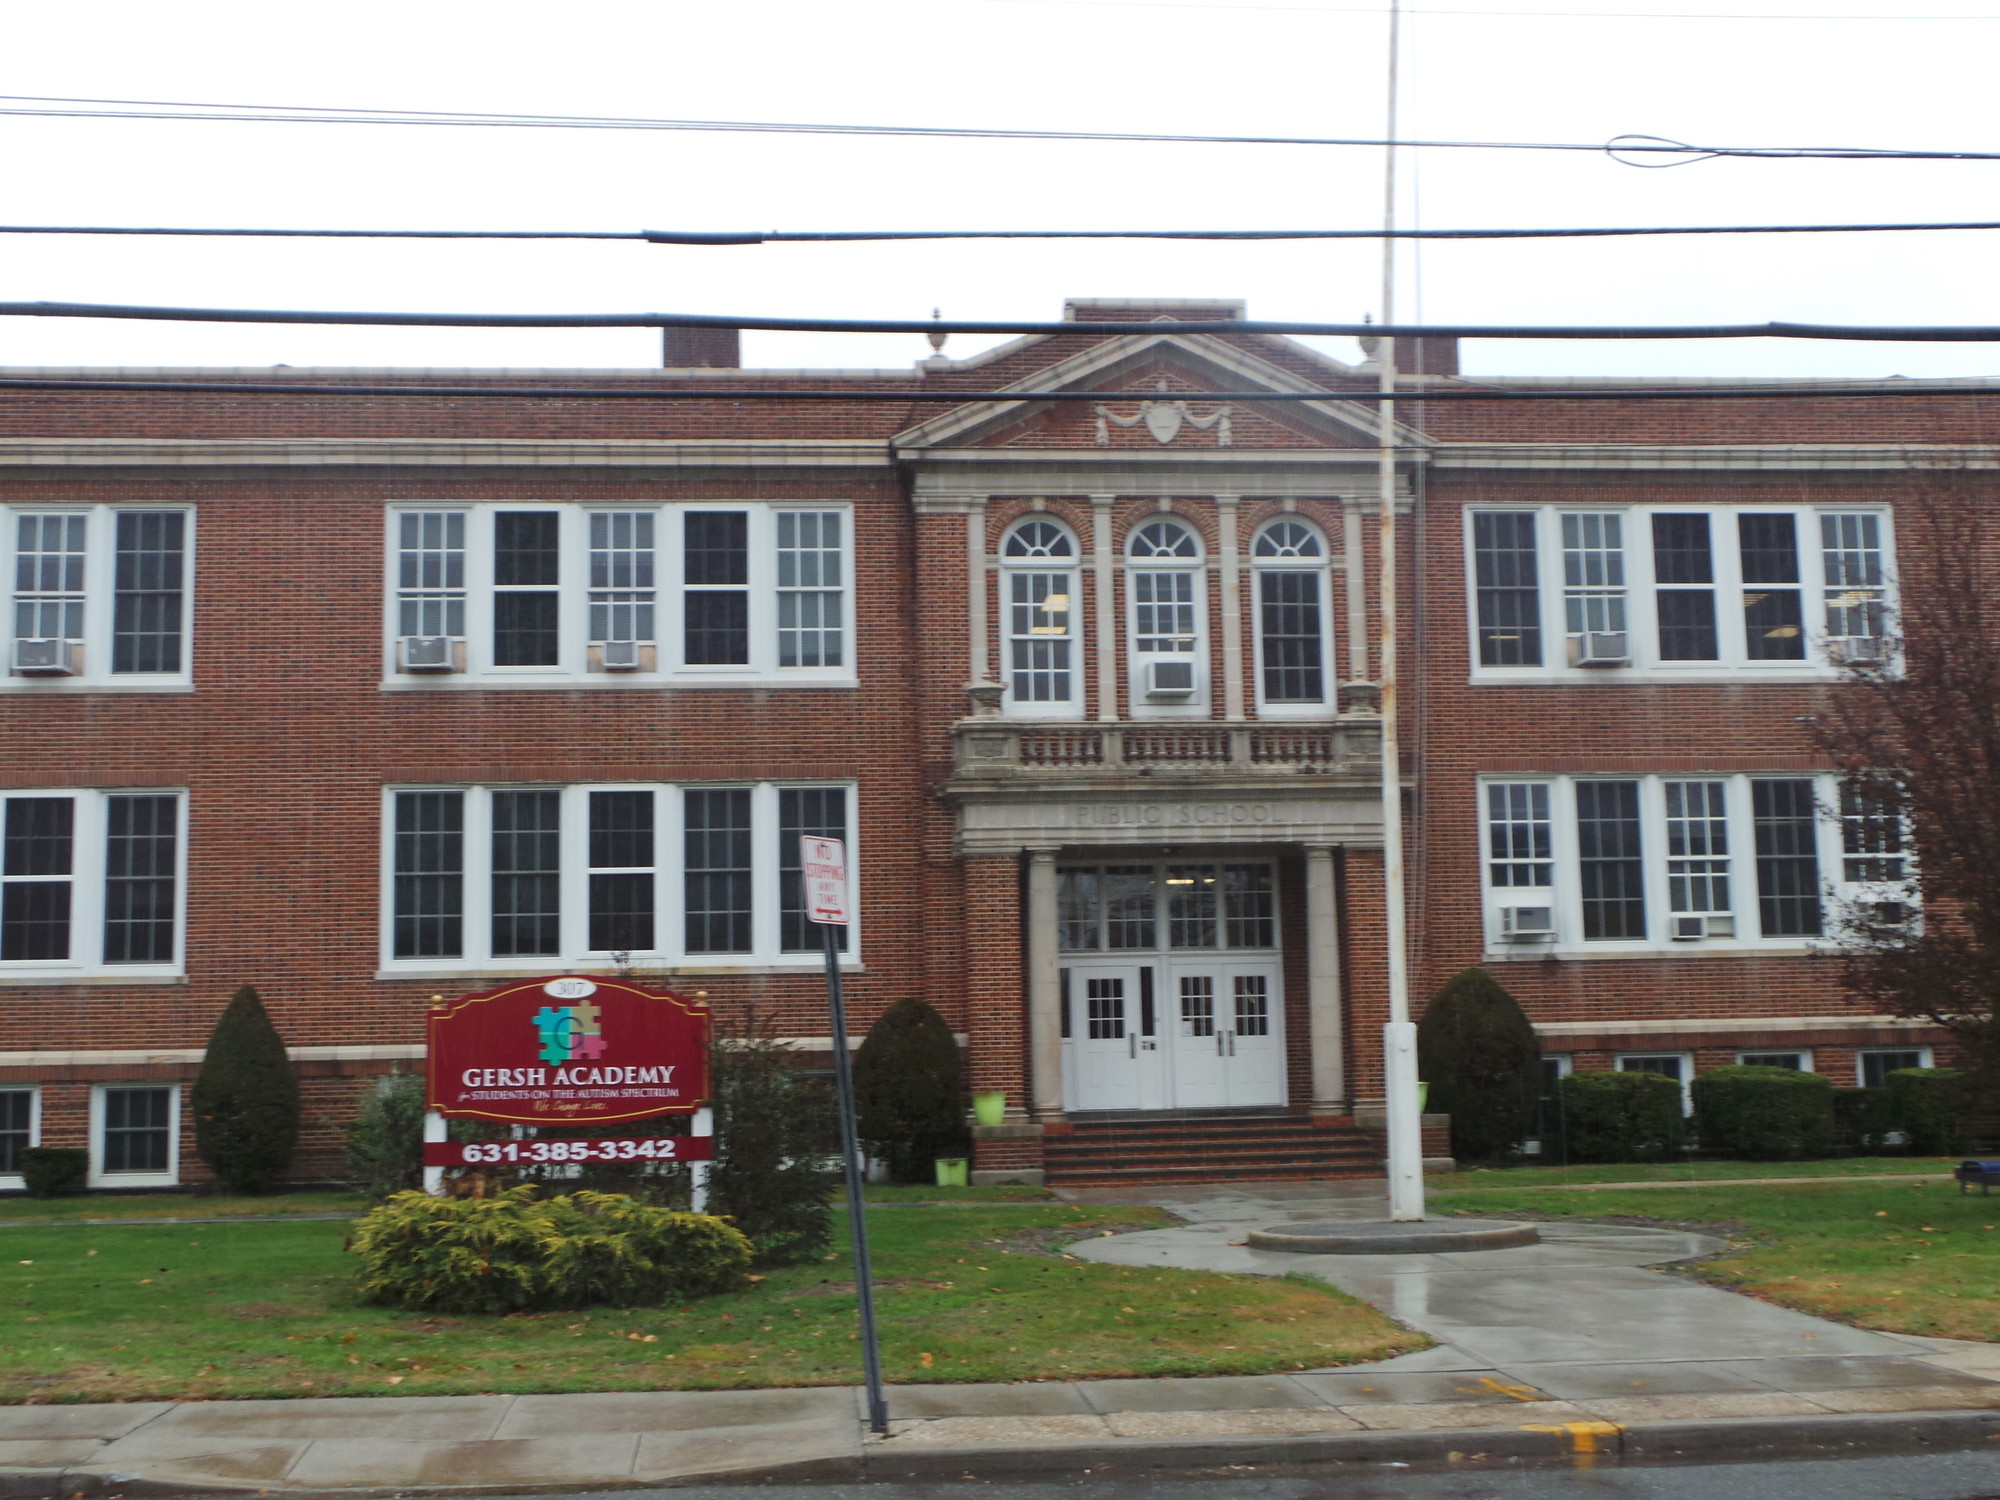 The demolition of the Gersh Academy on Eagle Ave. and the creation of athletic fields in its place is part of the West Hempstead Board of Education’s $46 million capital project bond referendum being presented to the public this November.